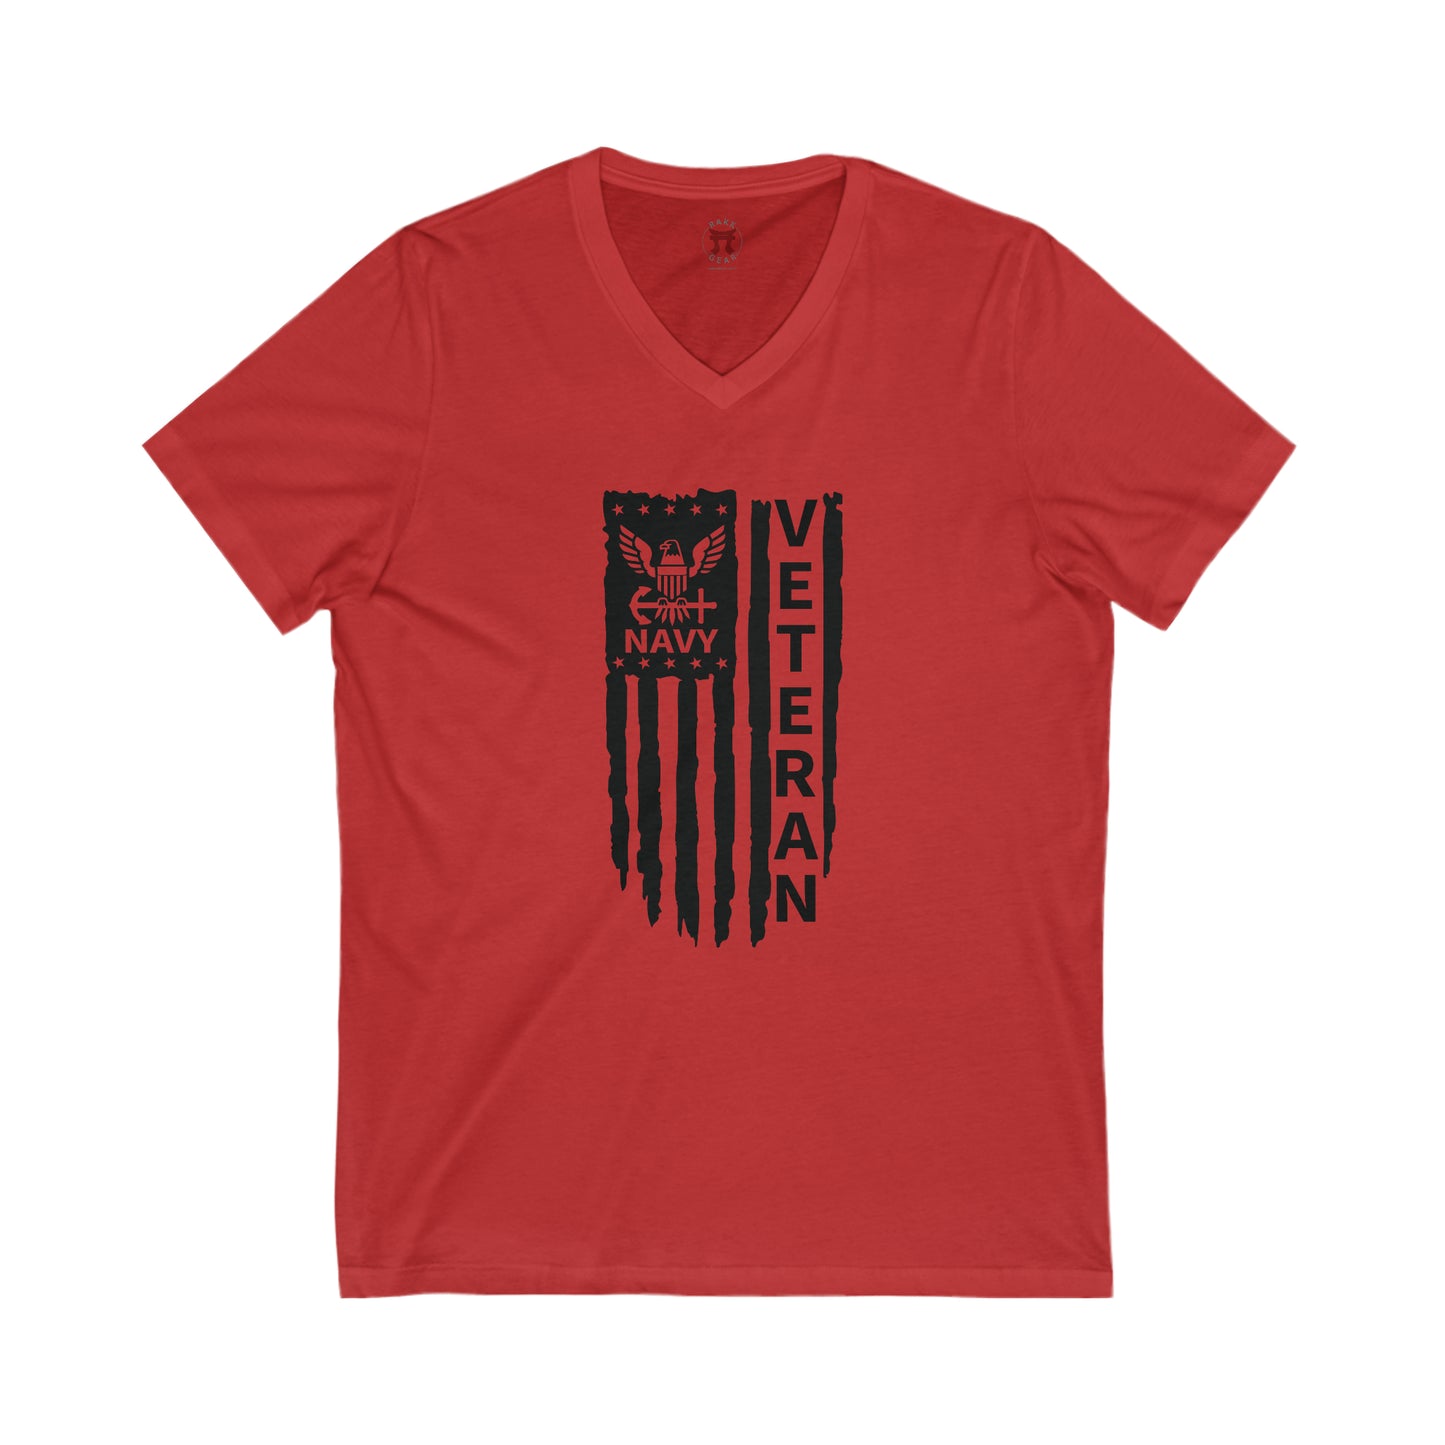 Rakkgear Women's Navy Veteran Red V-Neck T-Shirt featuring a distressed vertical American Flag with 'Navy Veteran' inside, and the Rakkgear logo on the upper back.